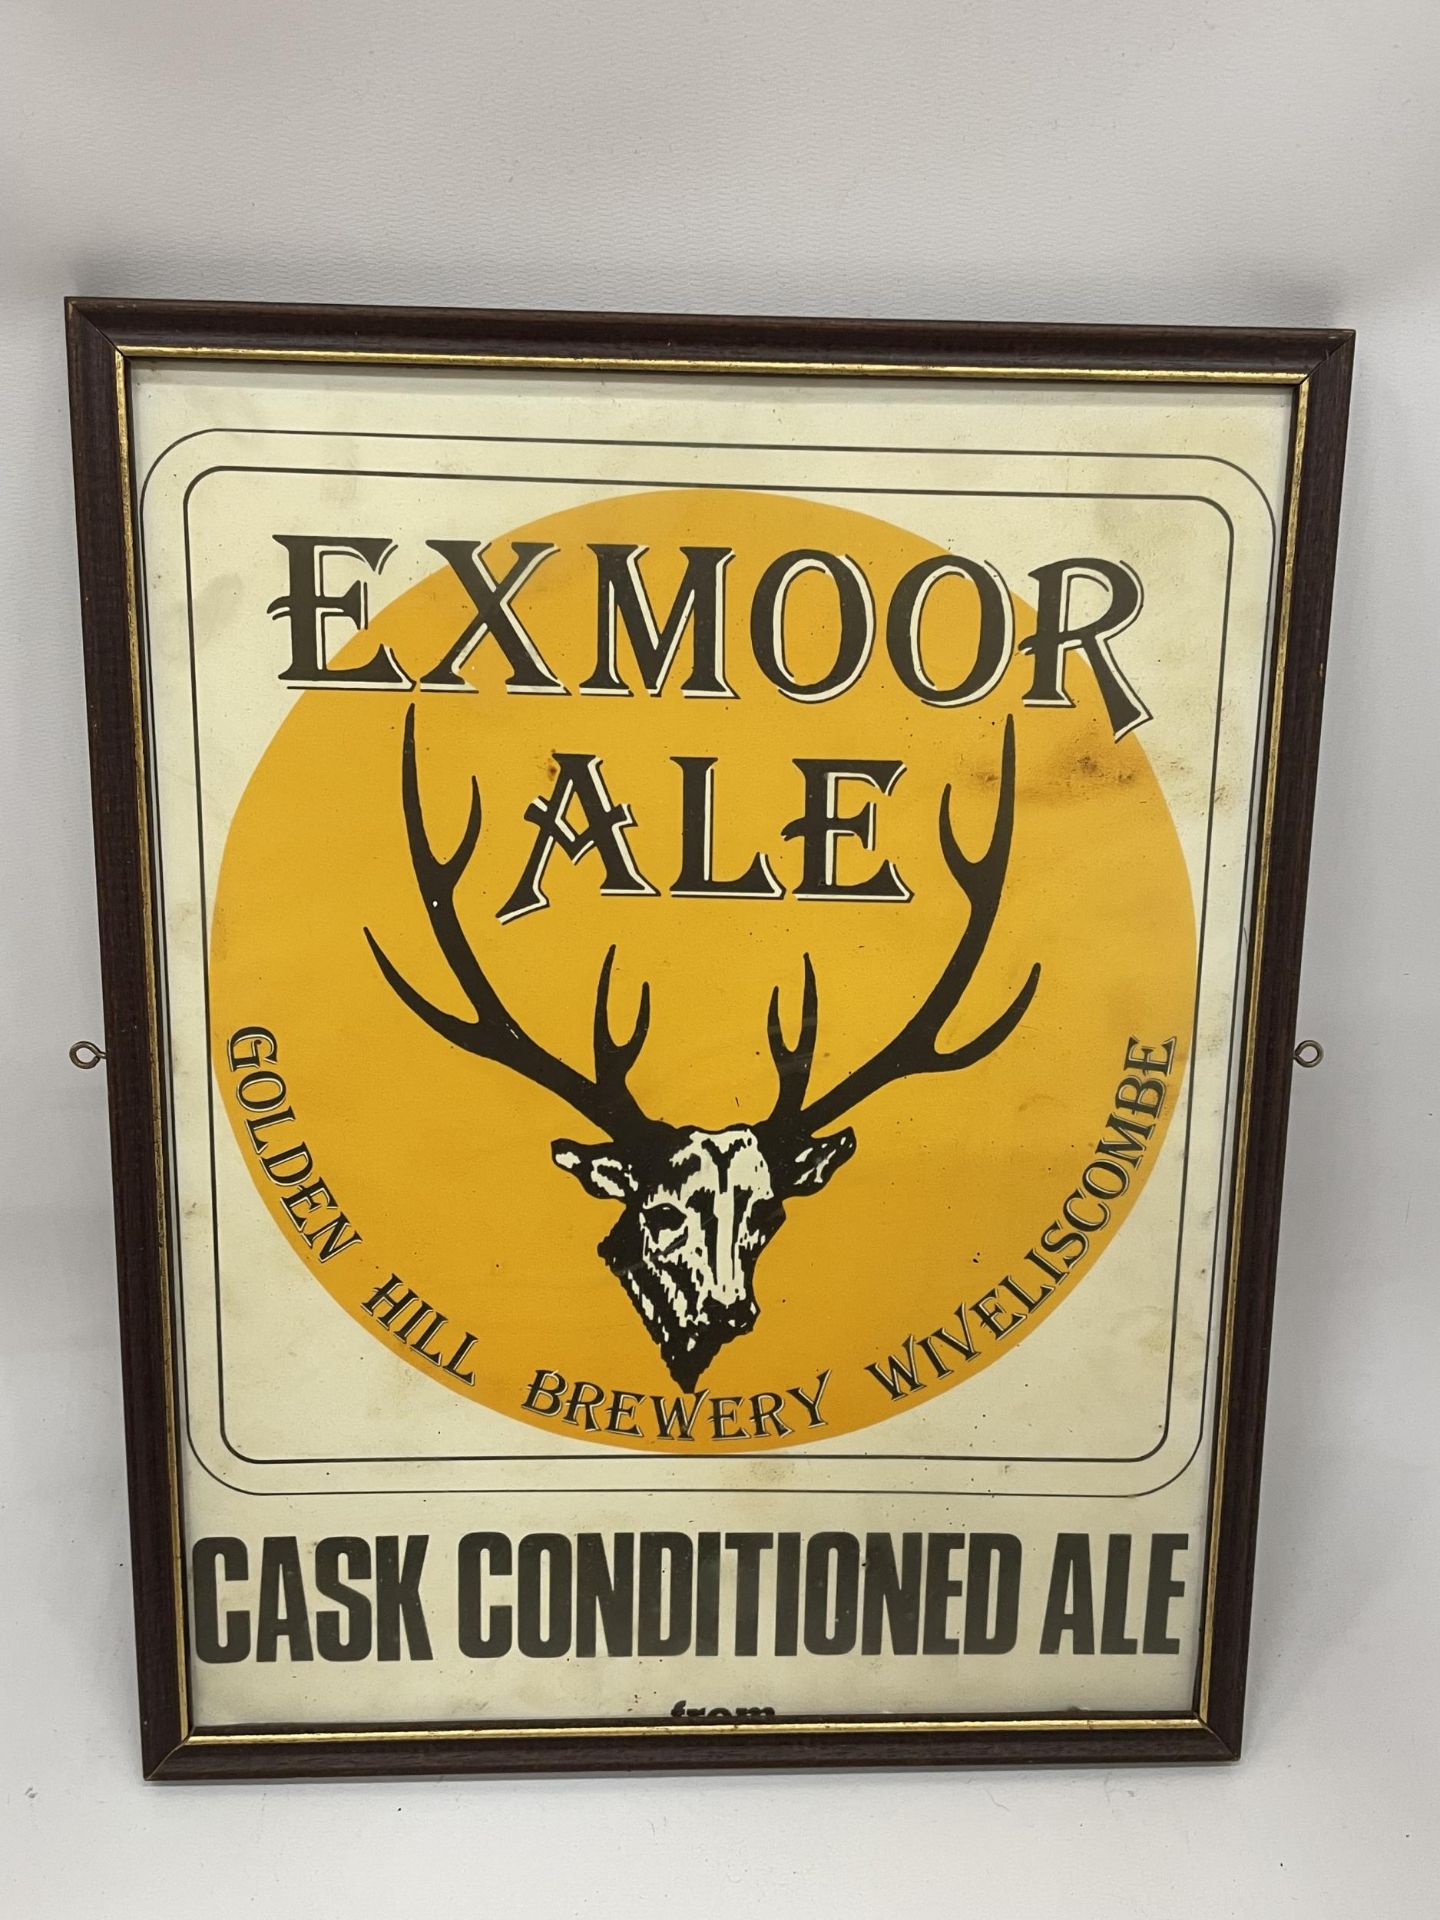 A VINTAGE EXMOOR ALE BREWERANIA FRAMED POSTER